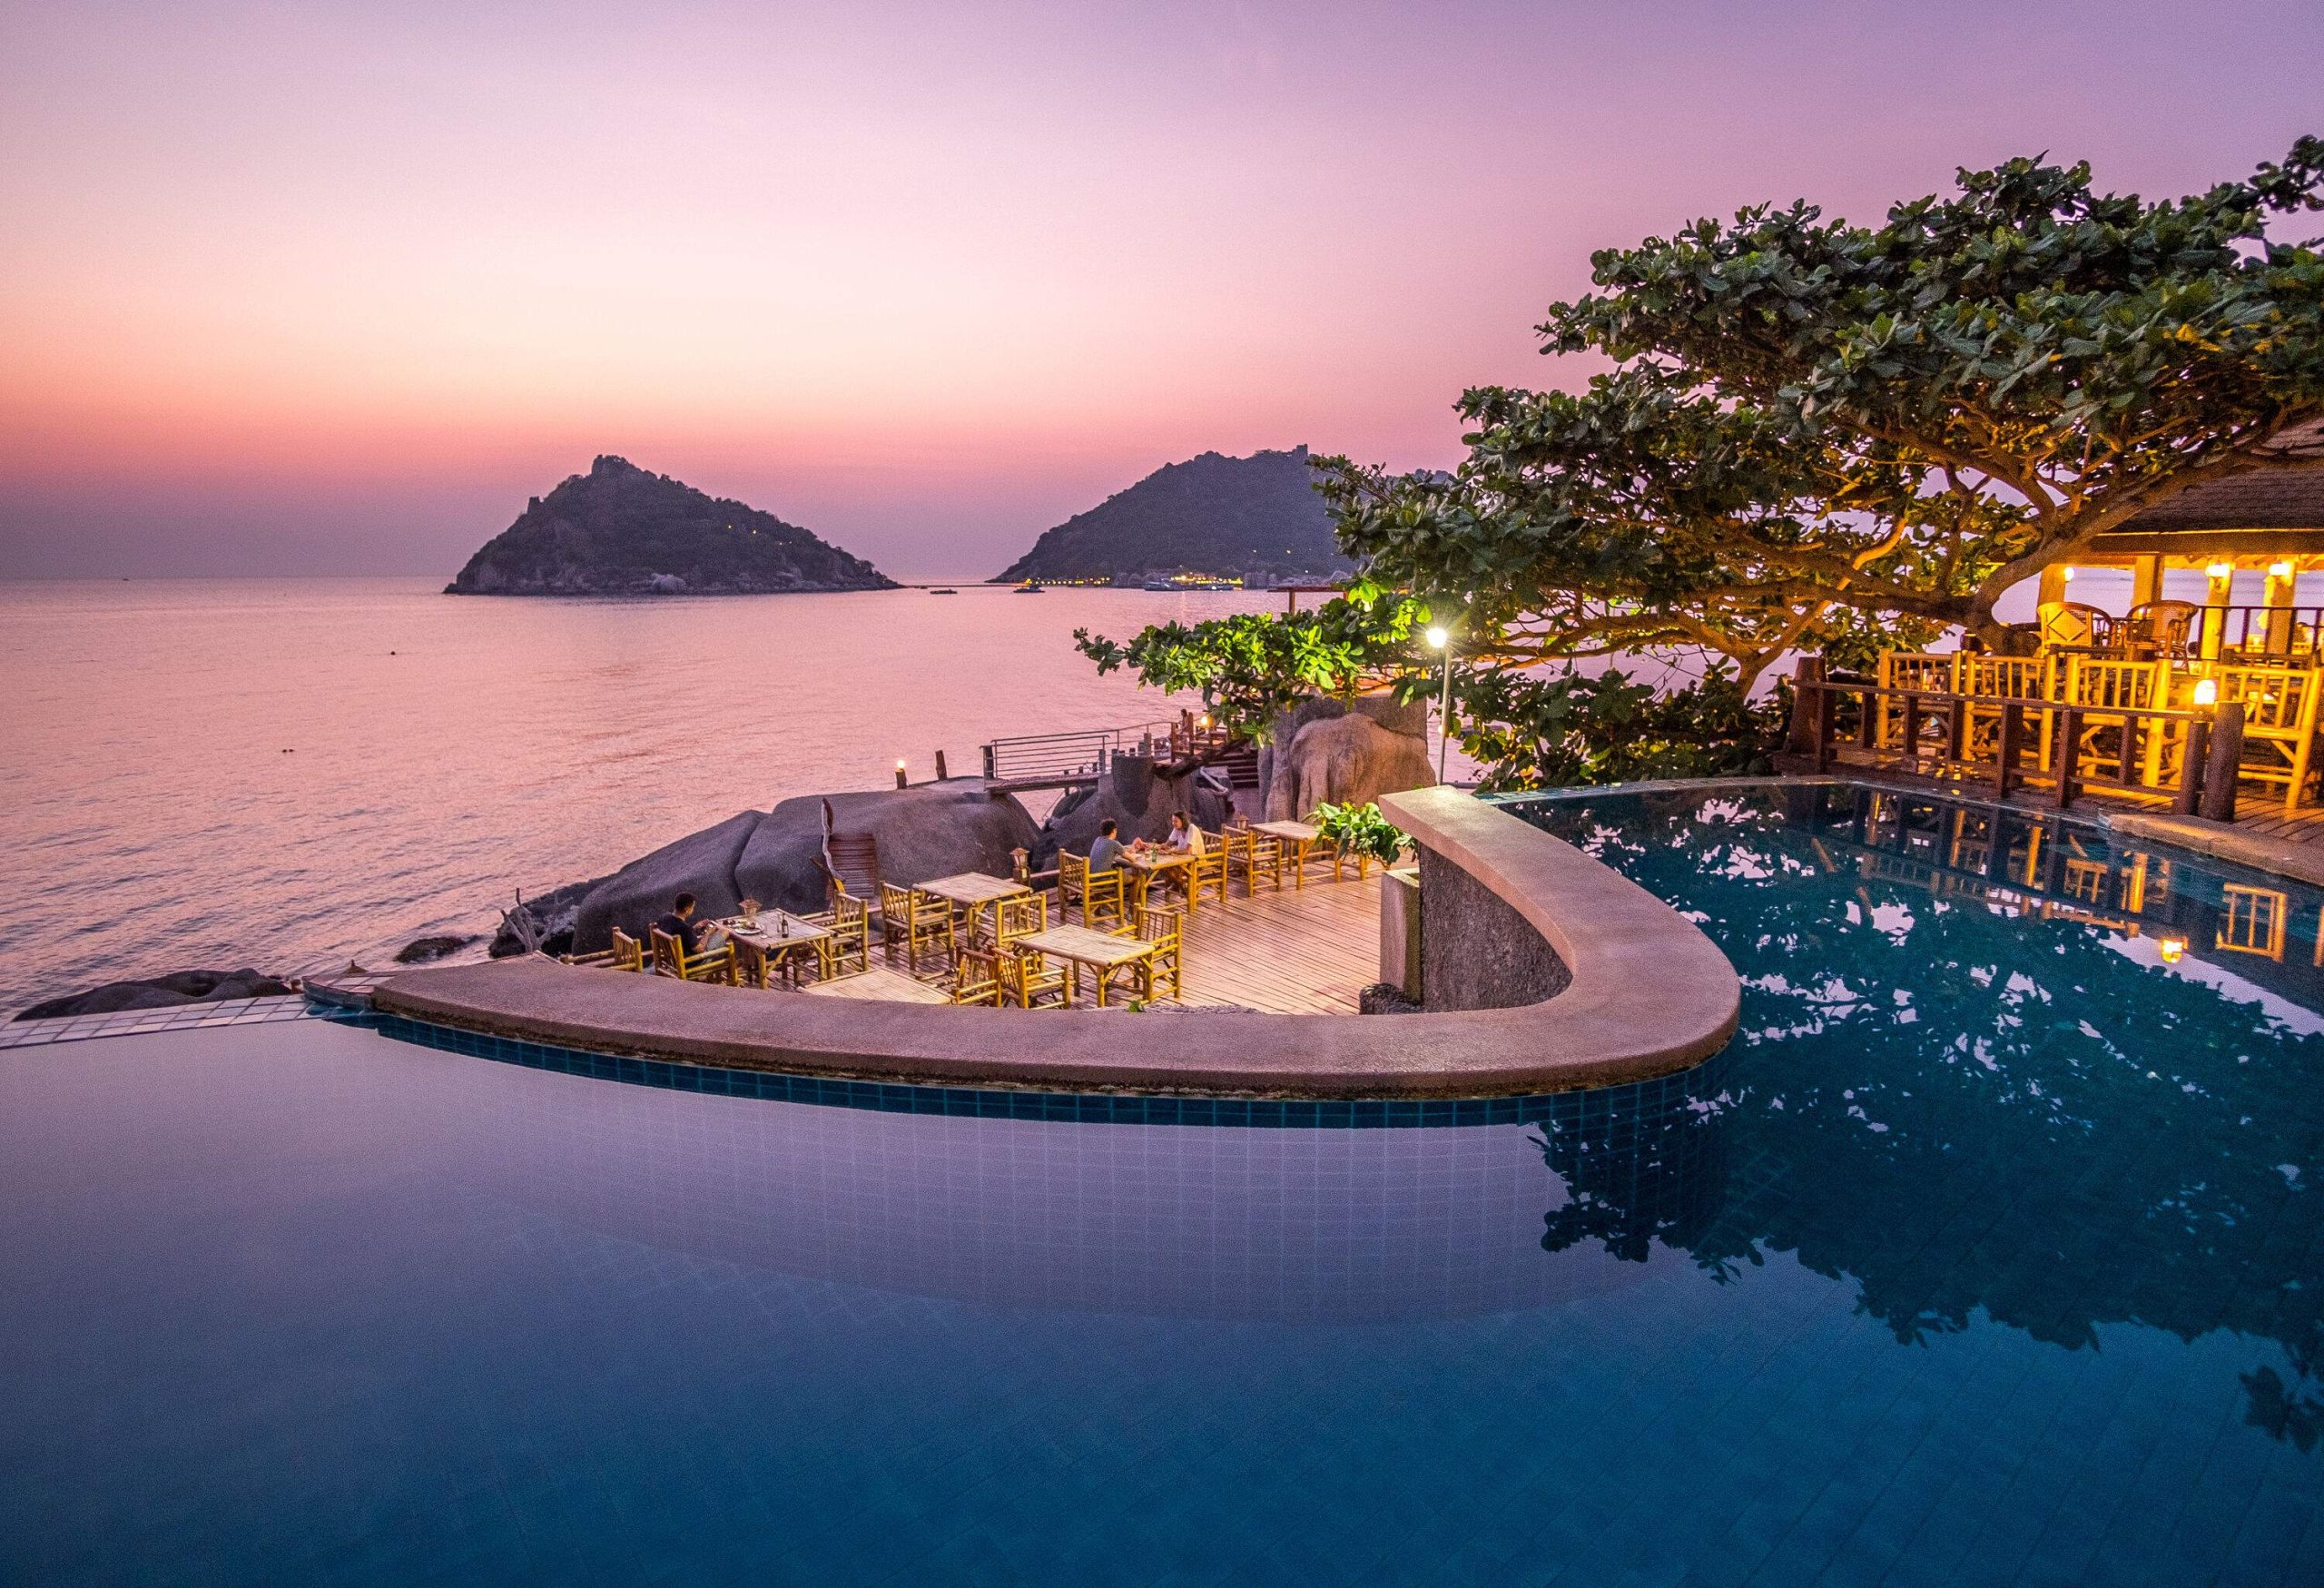 A resort pool and outdoor dining overlooking the picturesque sea against the scenic twilight sky.